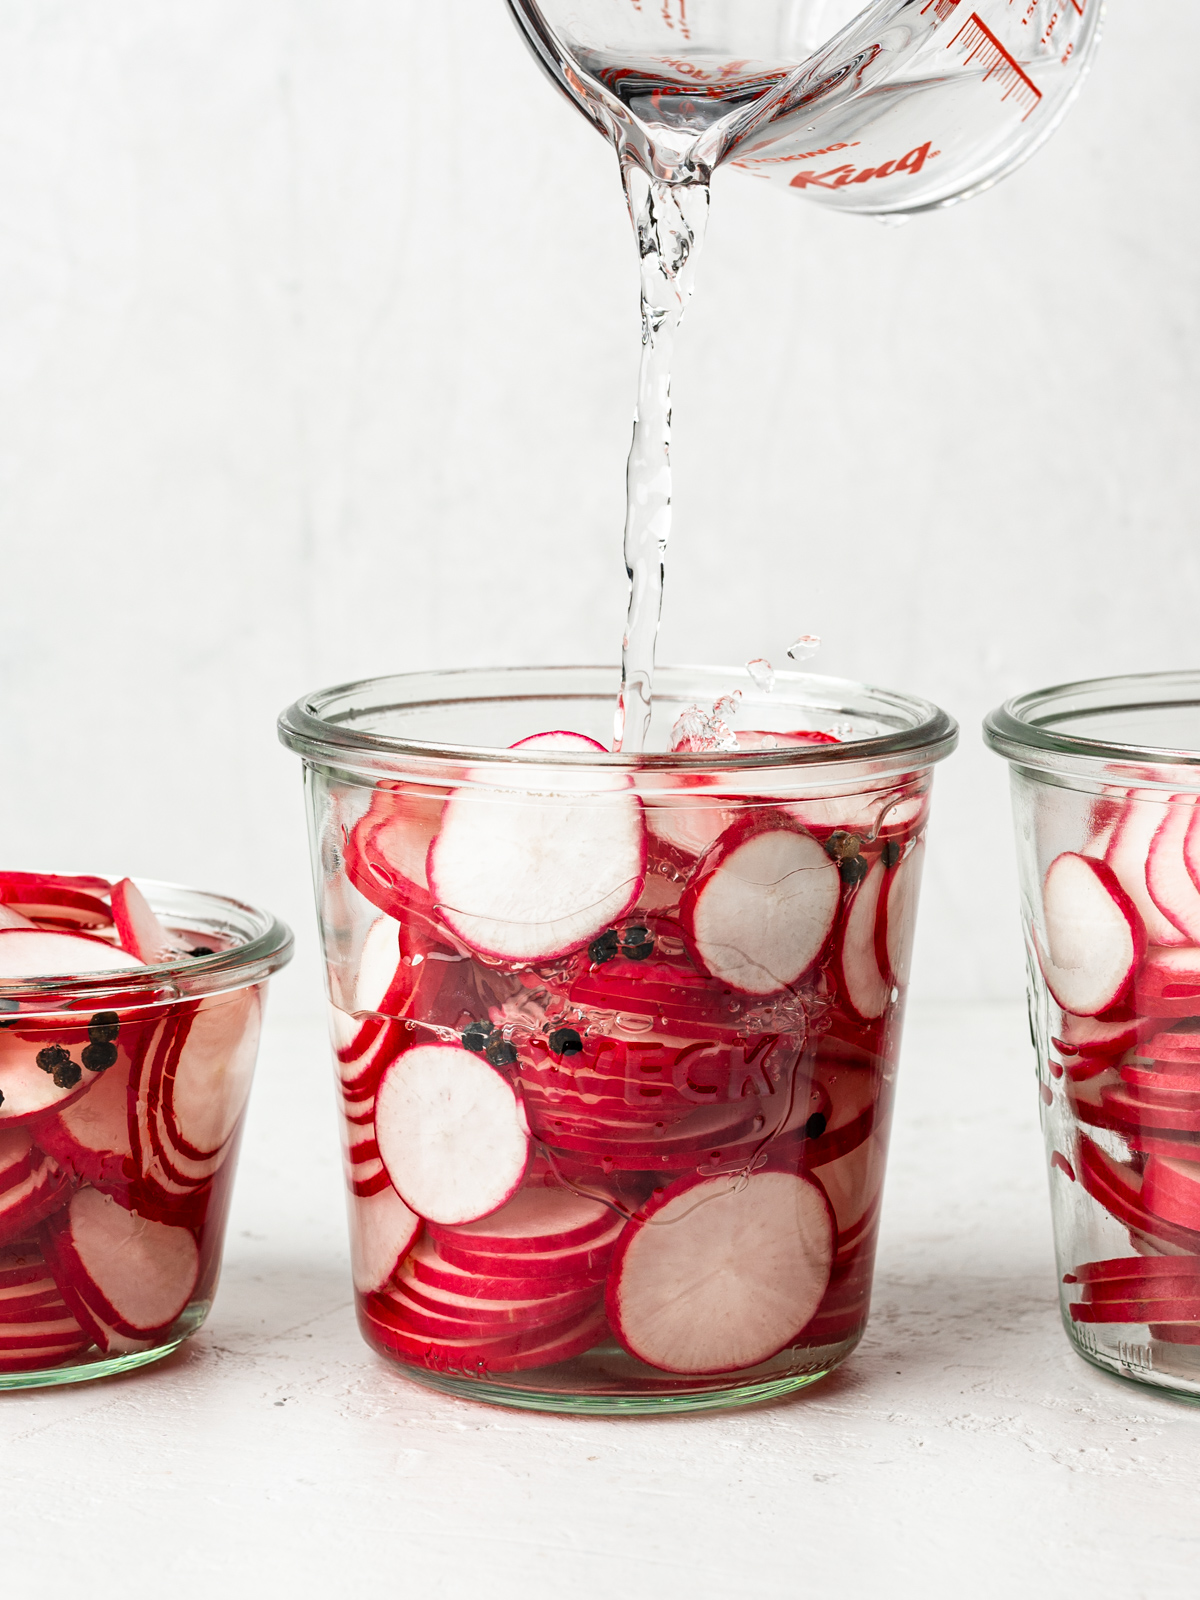 pouring pickling liquid into jars with sliced radishes